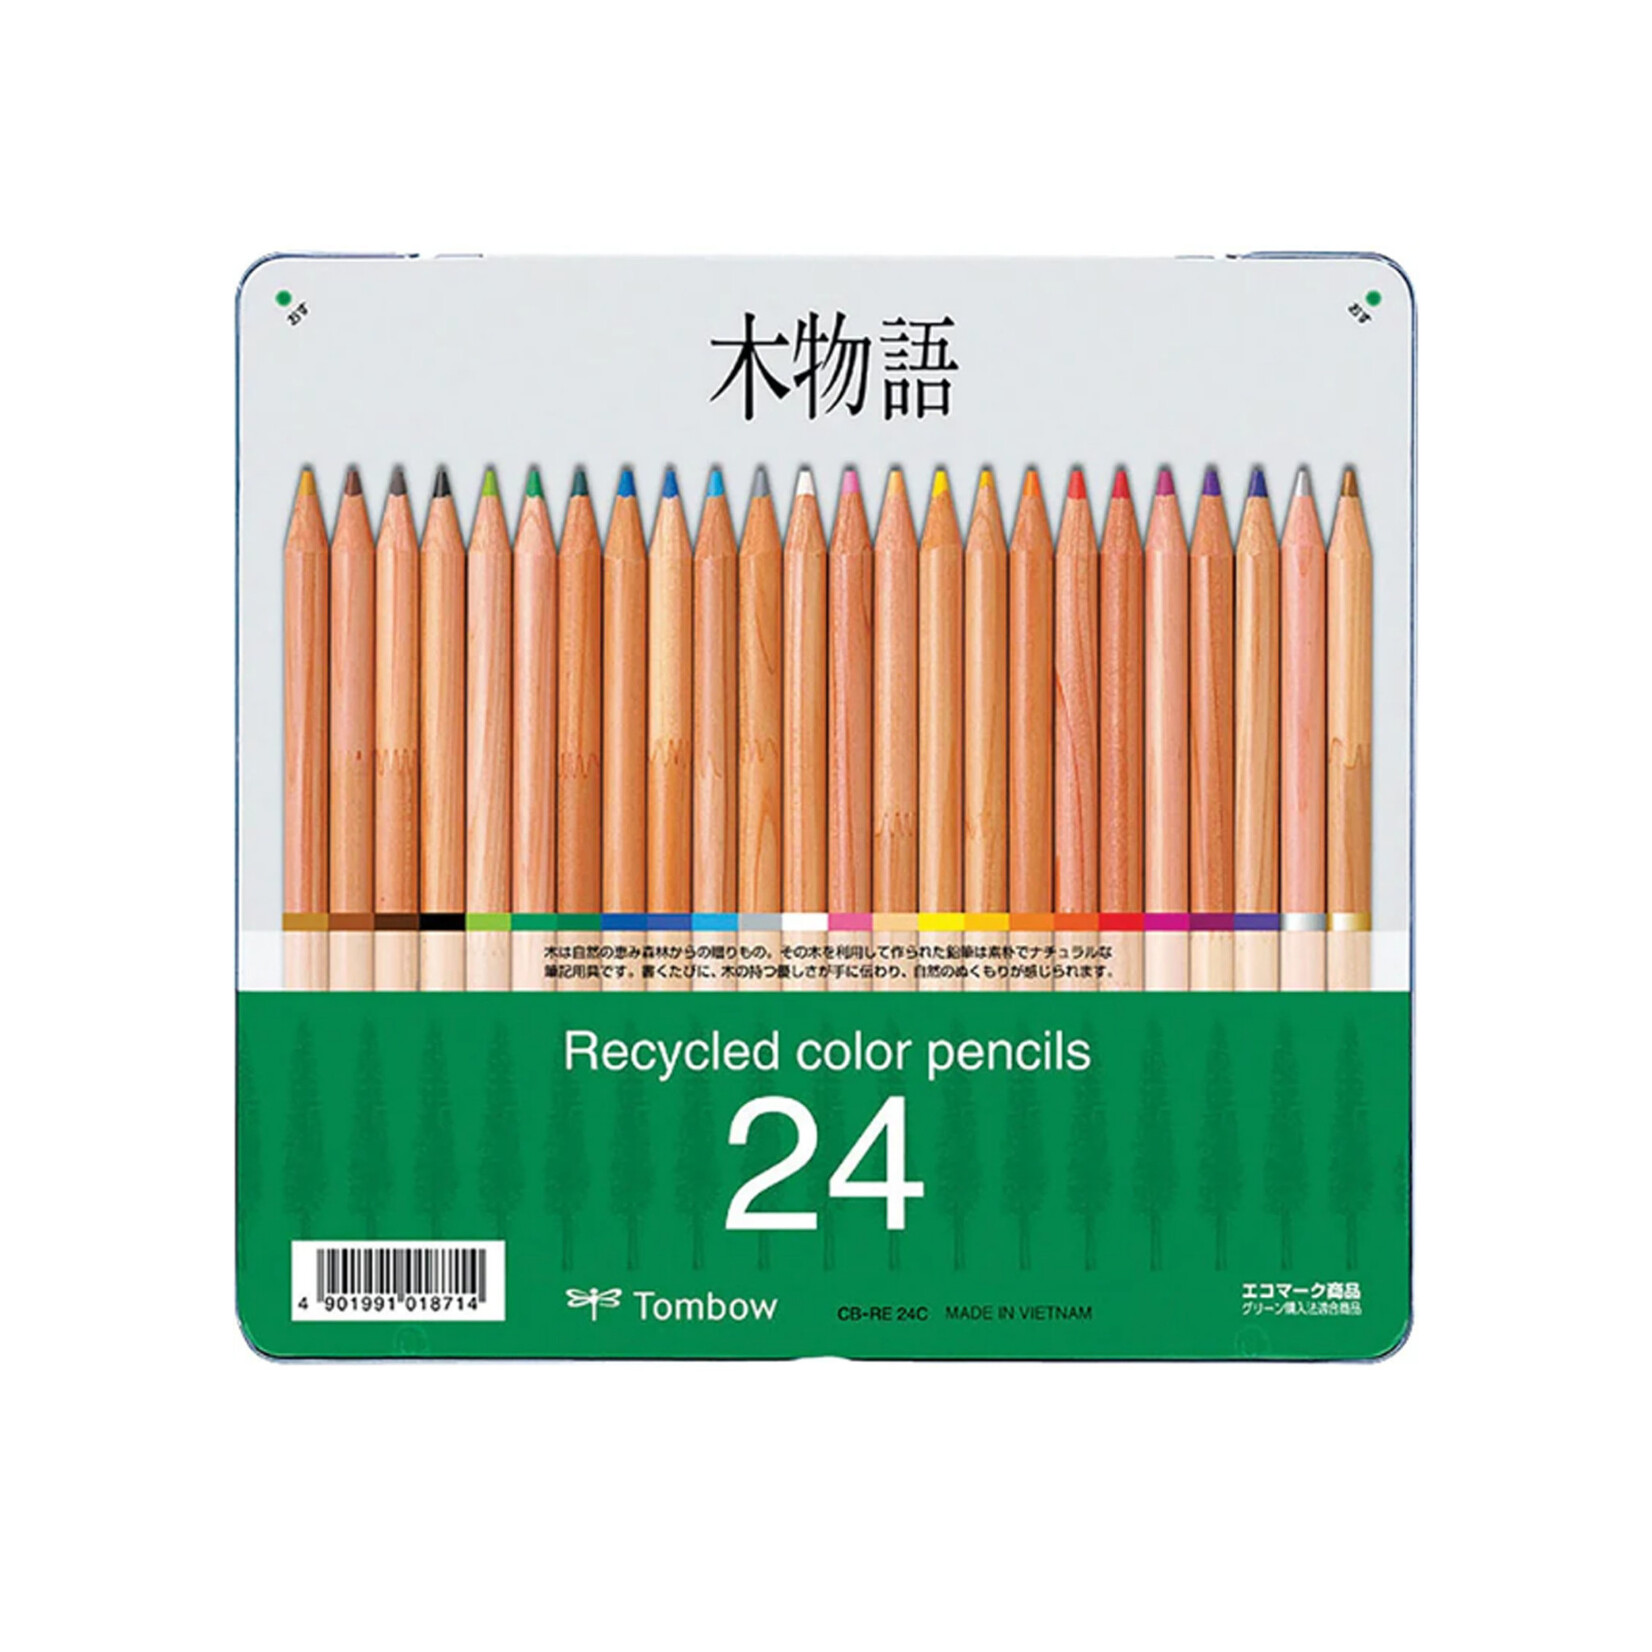 Tombow Recycled Colored Pencil Sets, 24